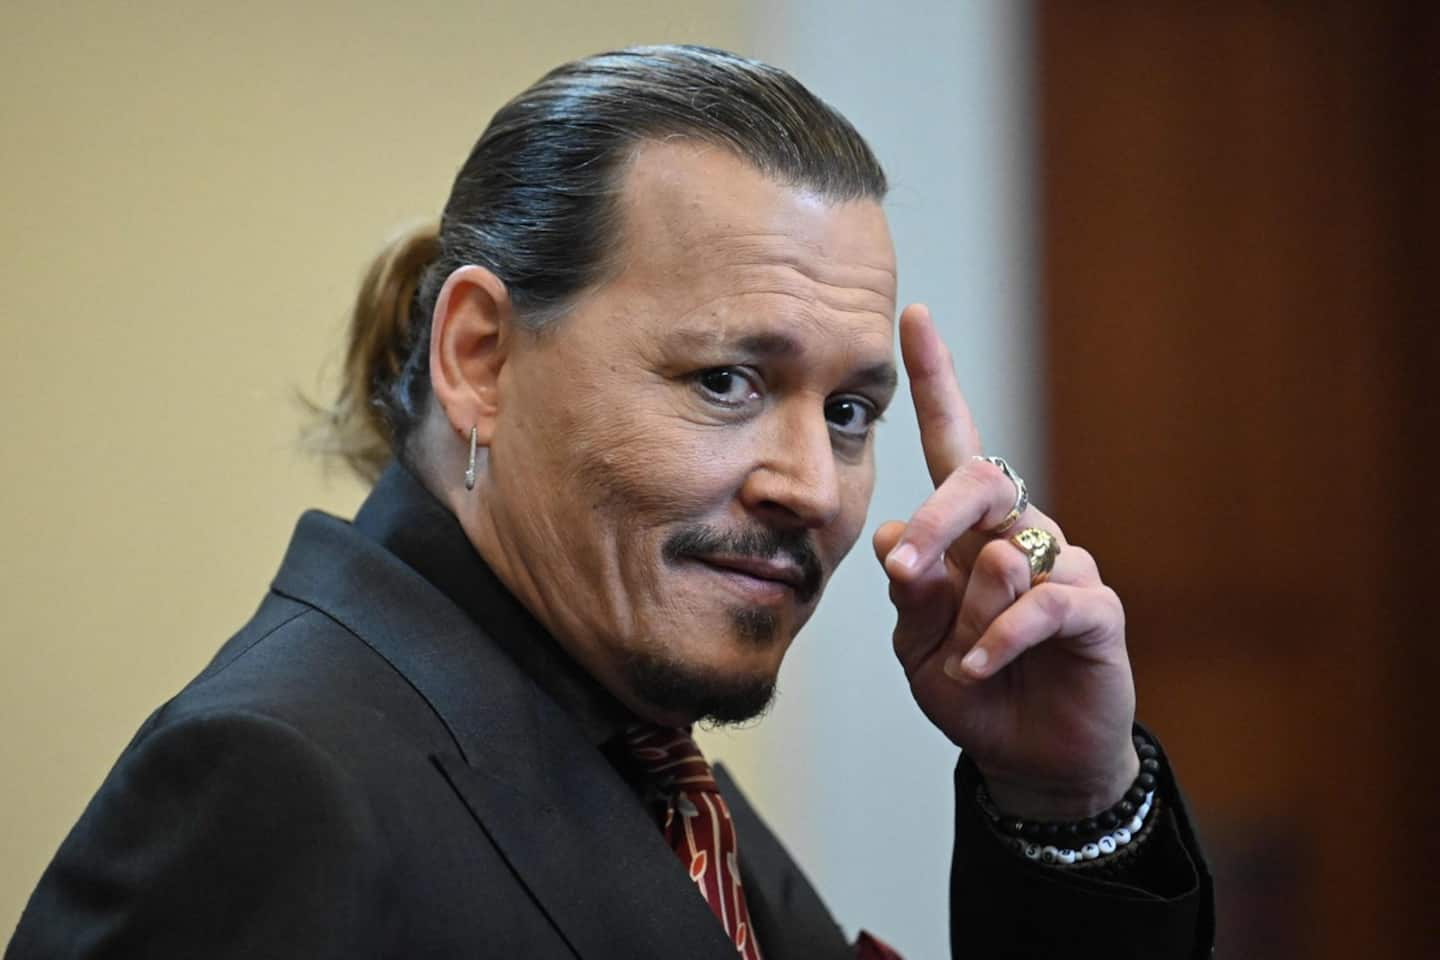 Johnny Depp's court victory "potentially catastrophic" for victims of violence